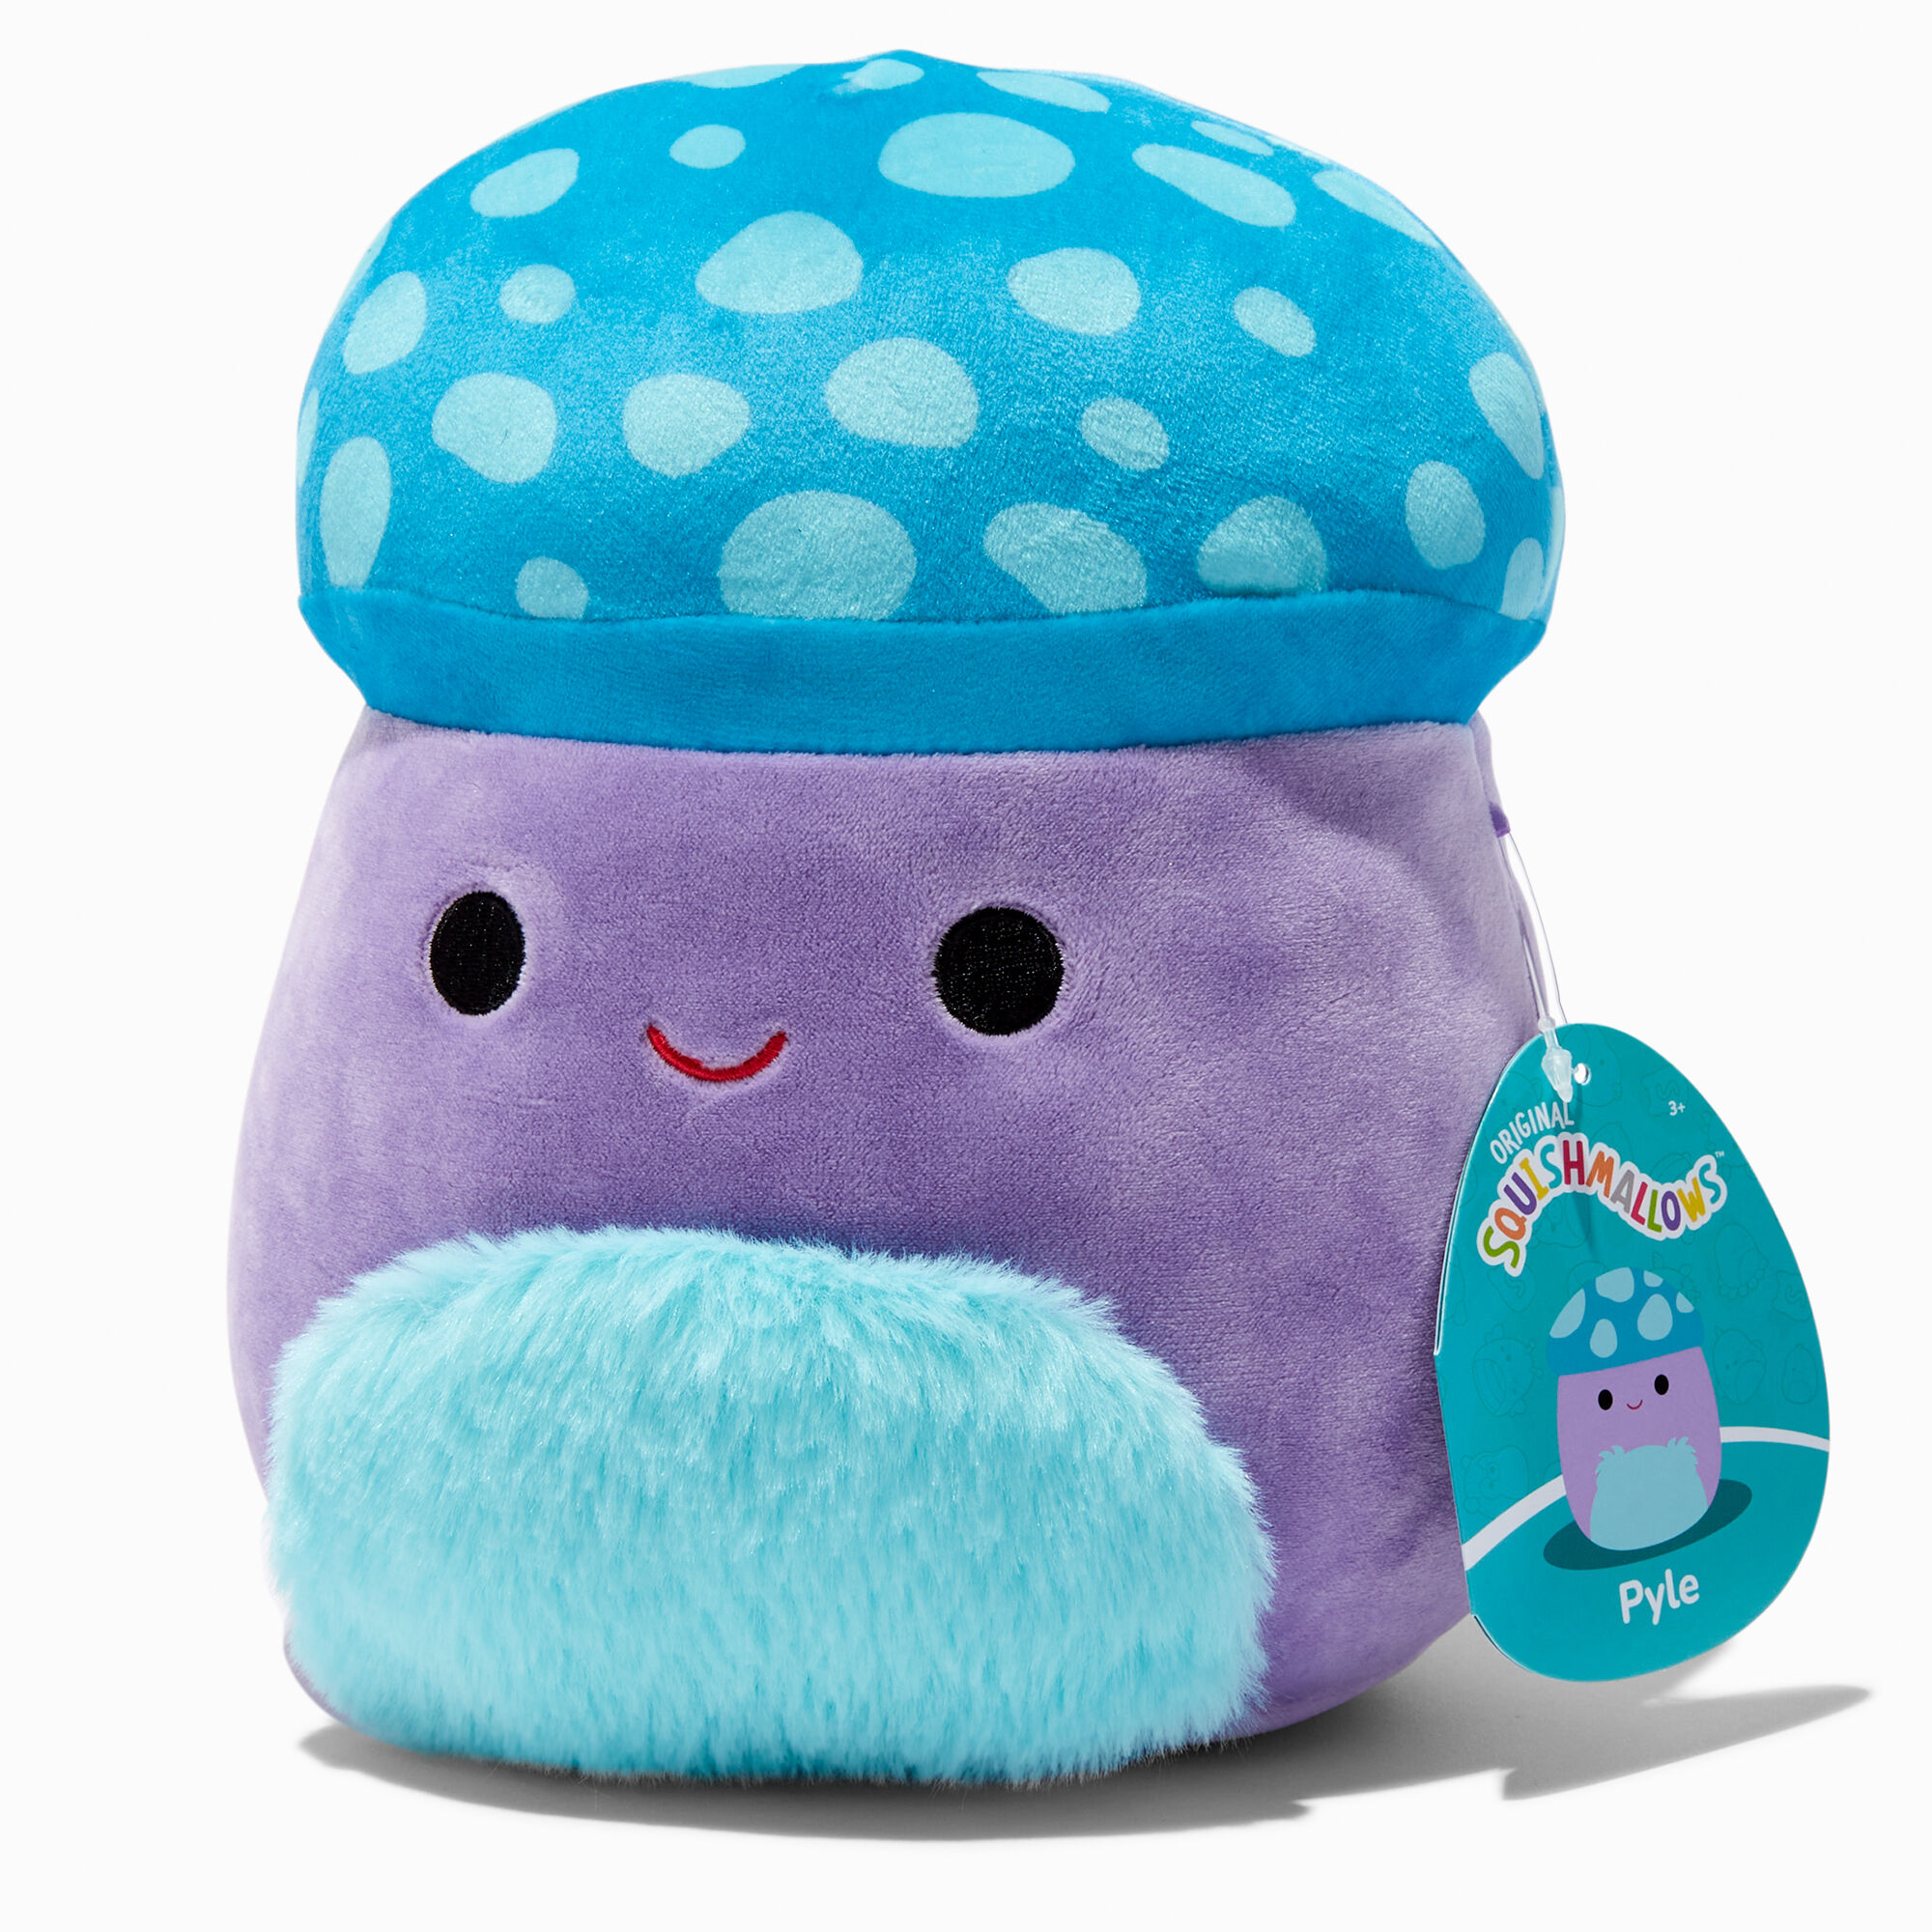 View Claires Squishmallows 8 Pyle Soft Toy information